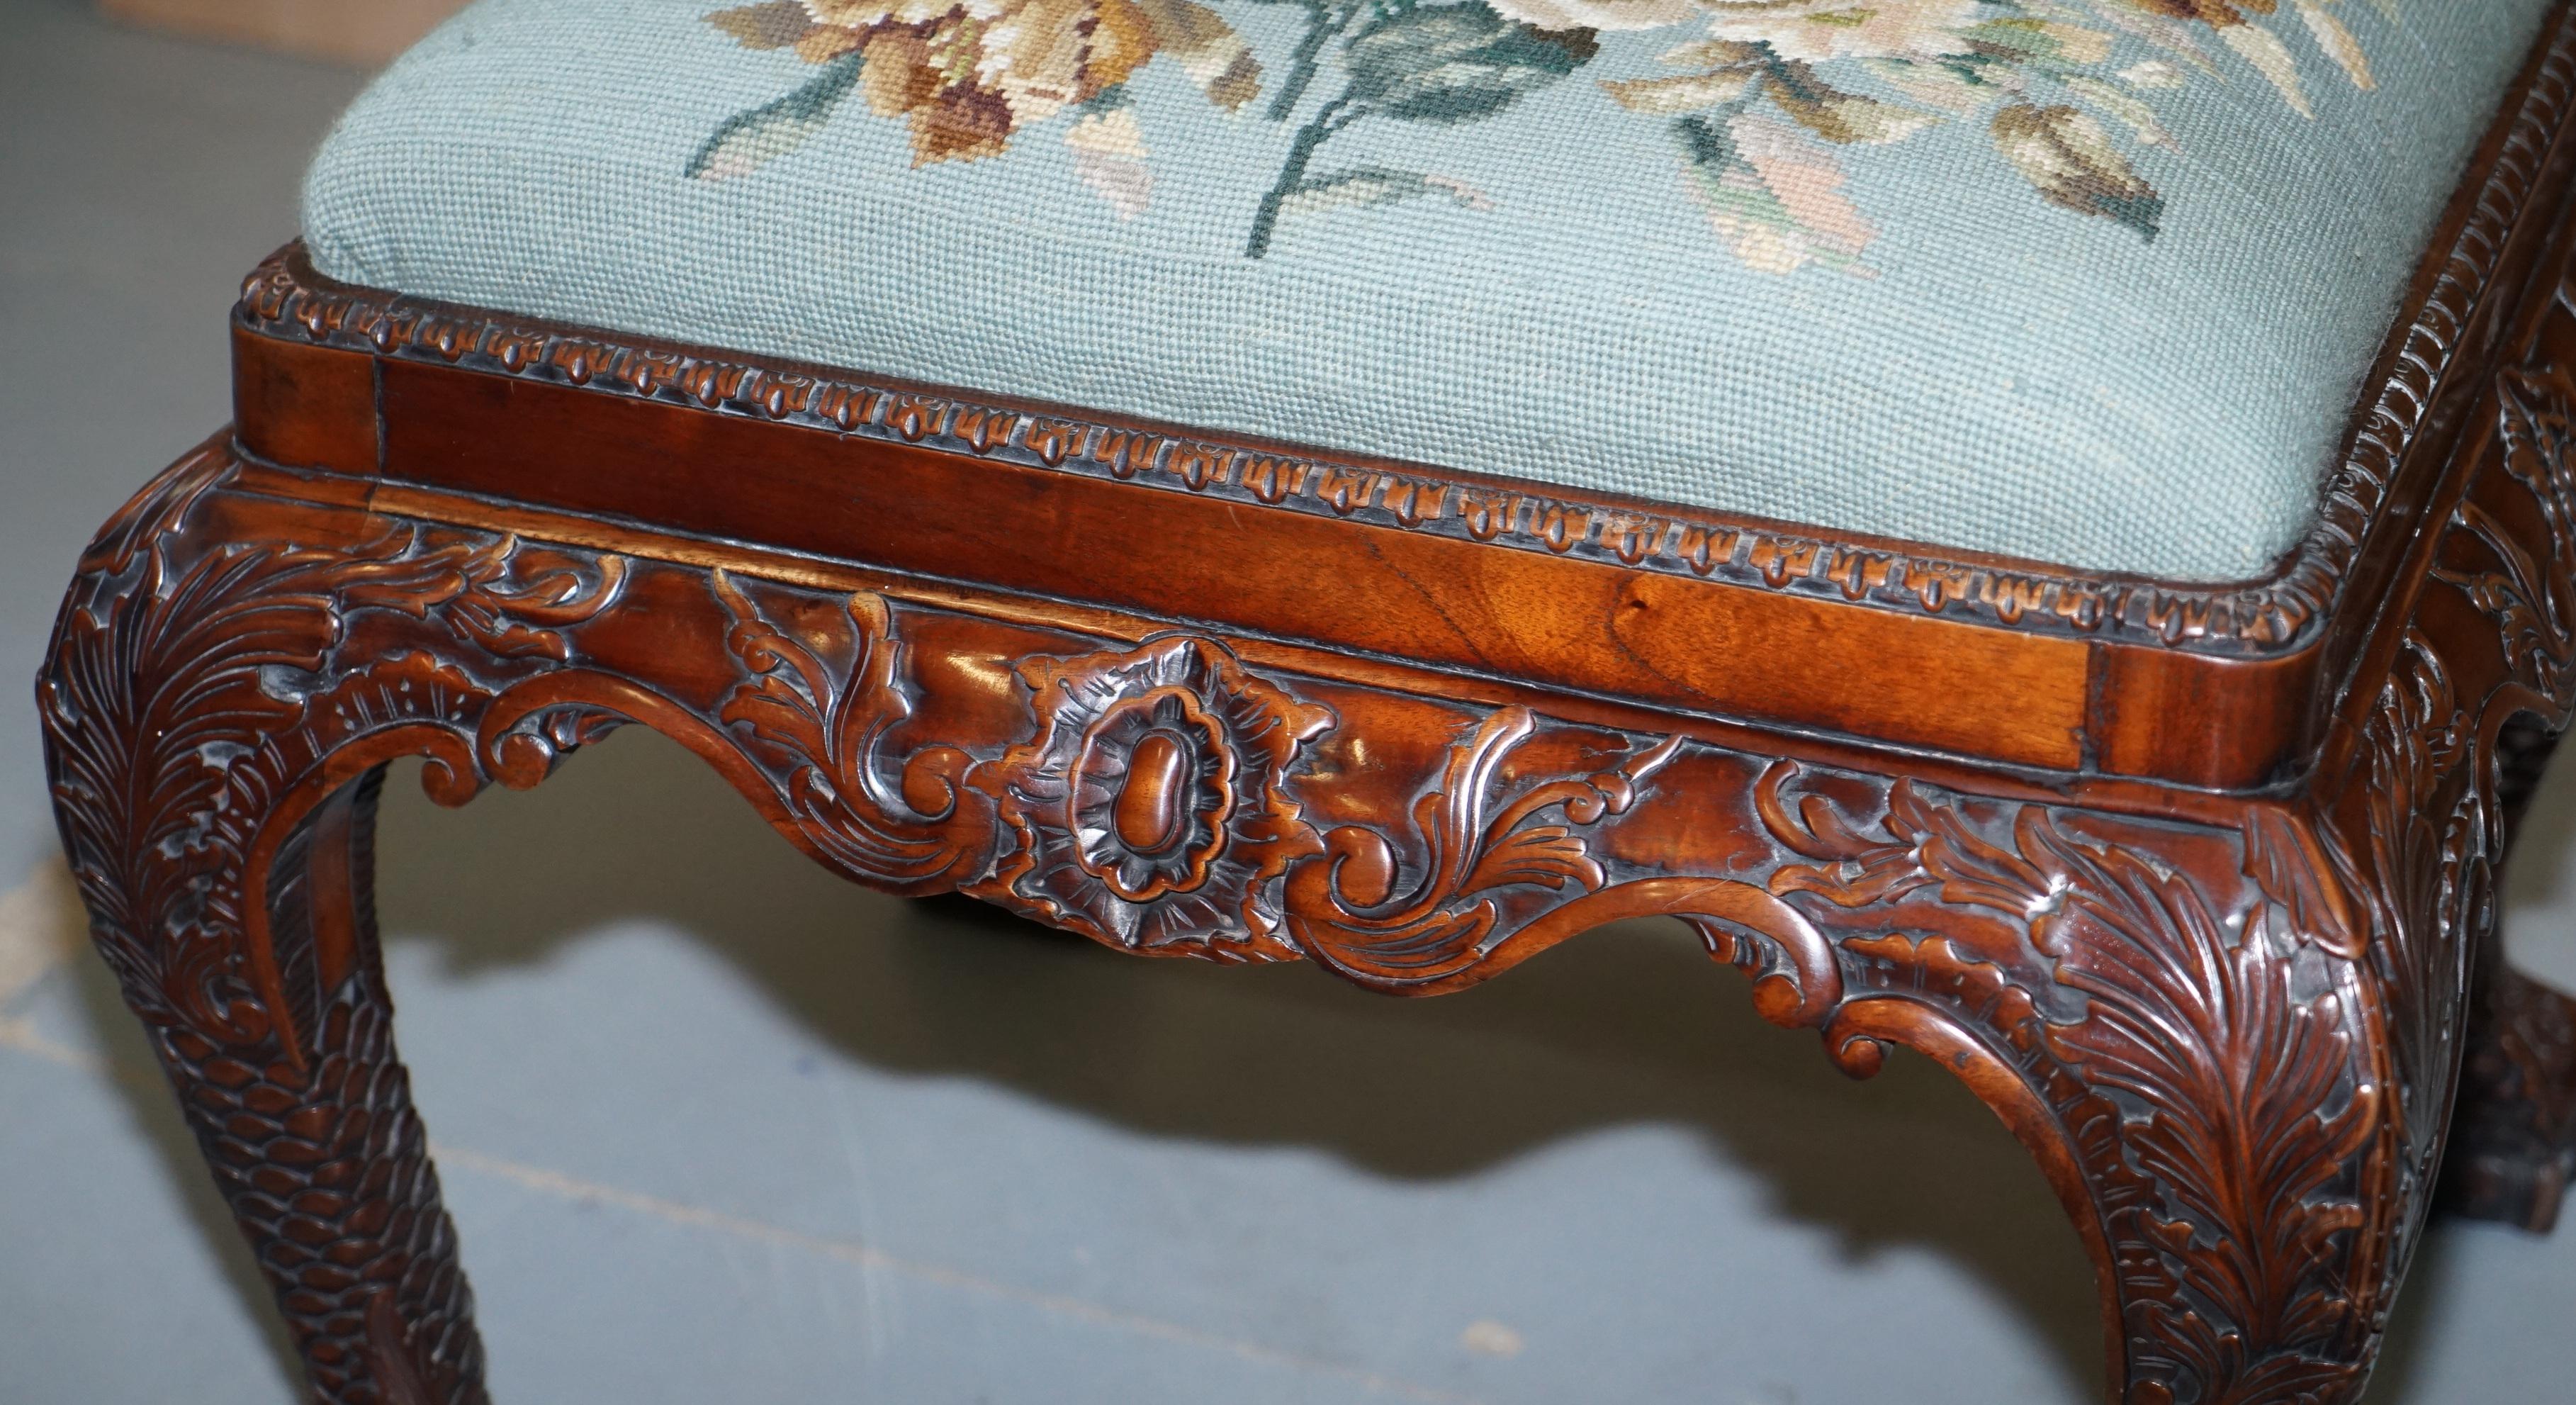 George II Hand Carved Mahogany Floral Embroidered Stool for Dressing Table Piano (Englisch)